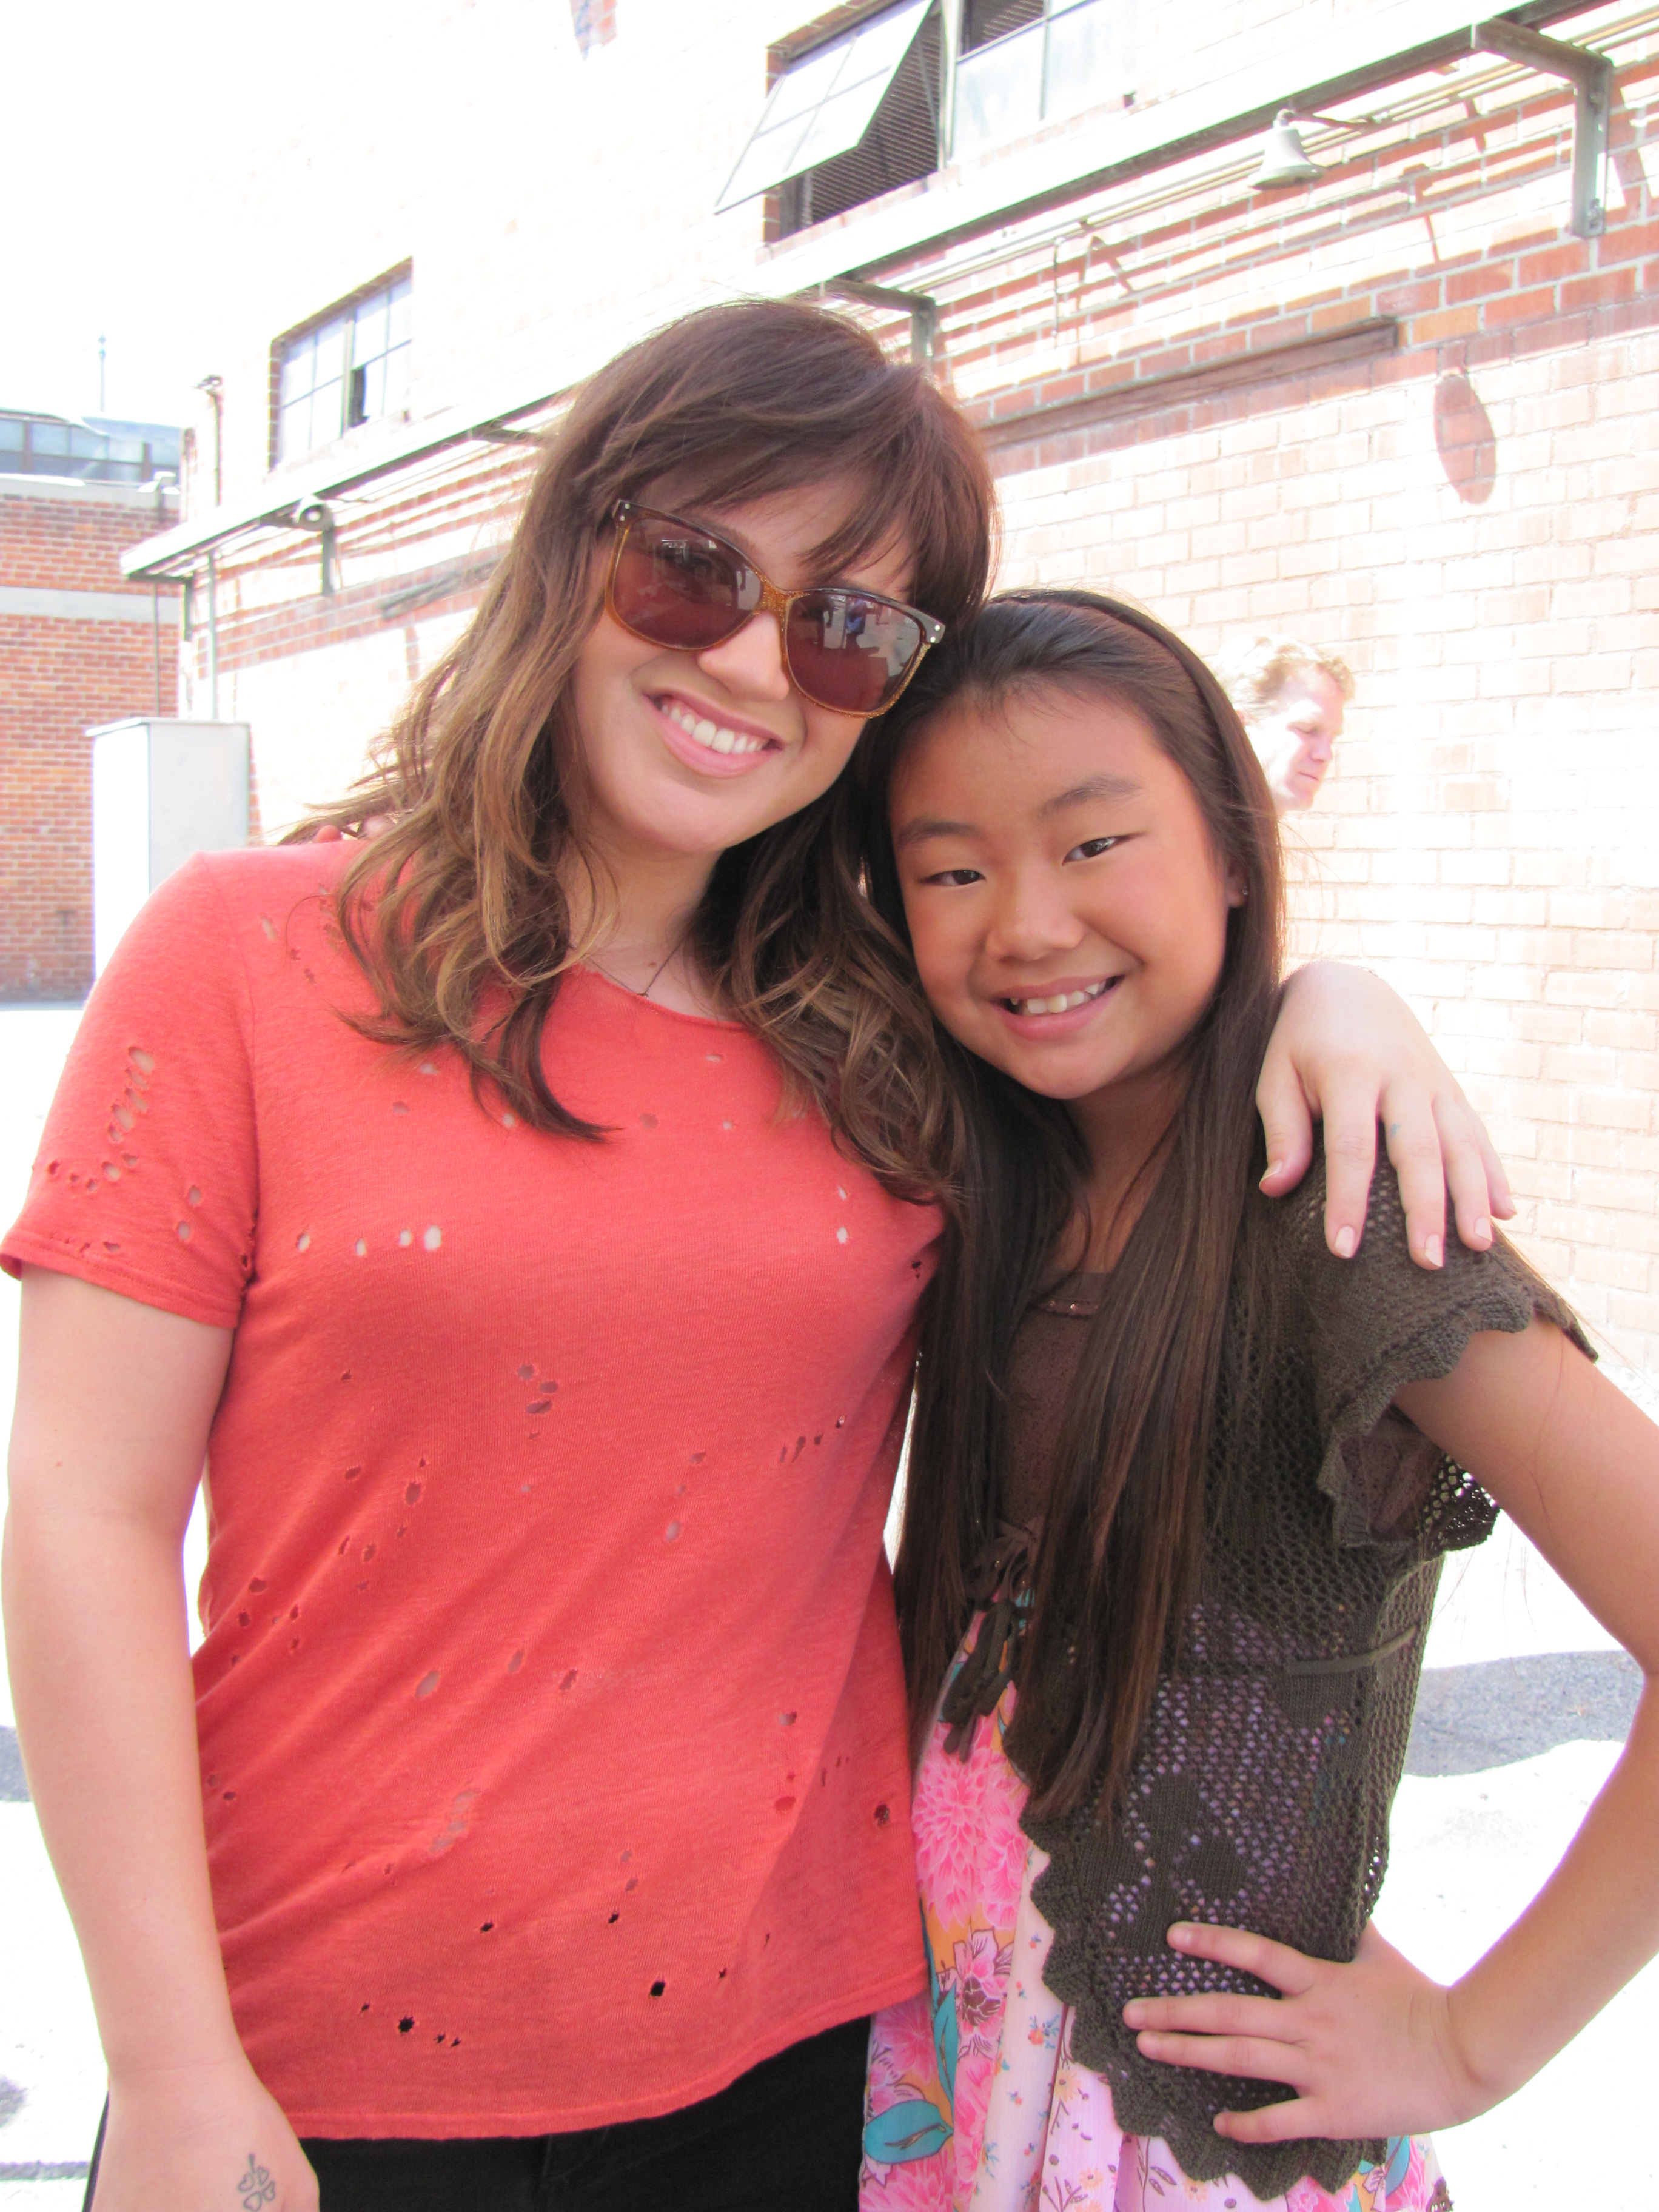 Victoria Grace with Kelly Clarkson on set making the 